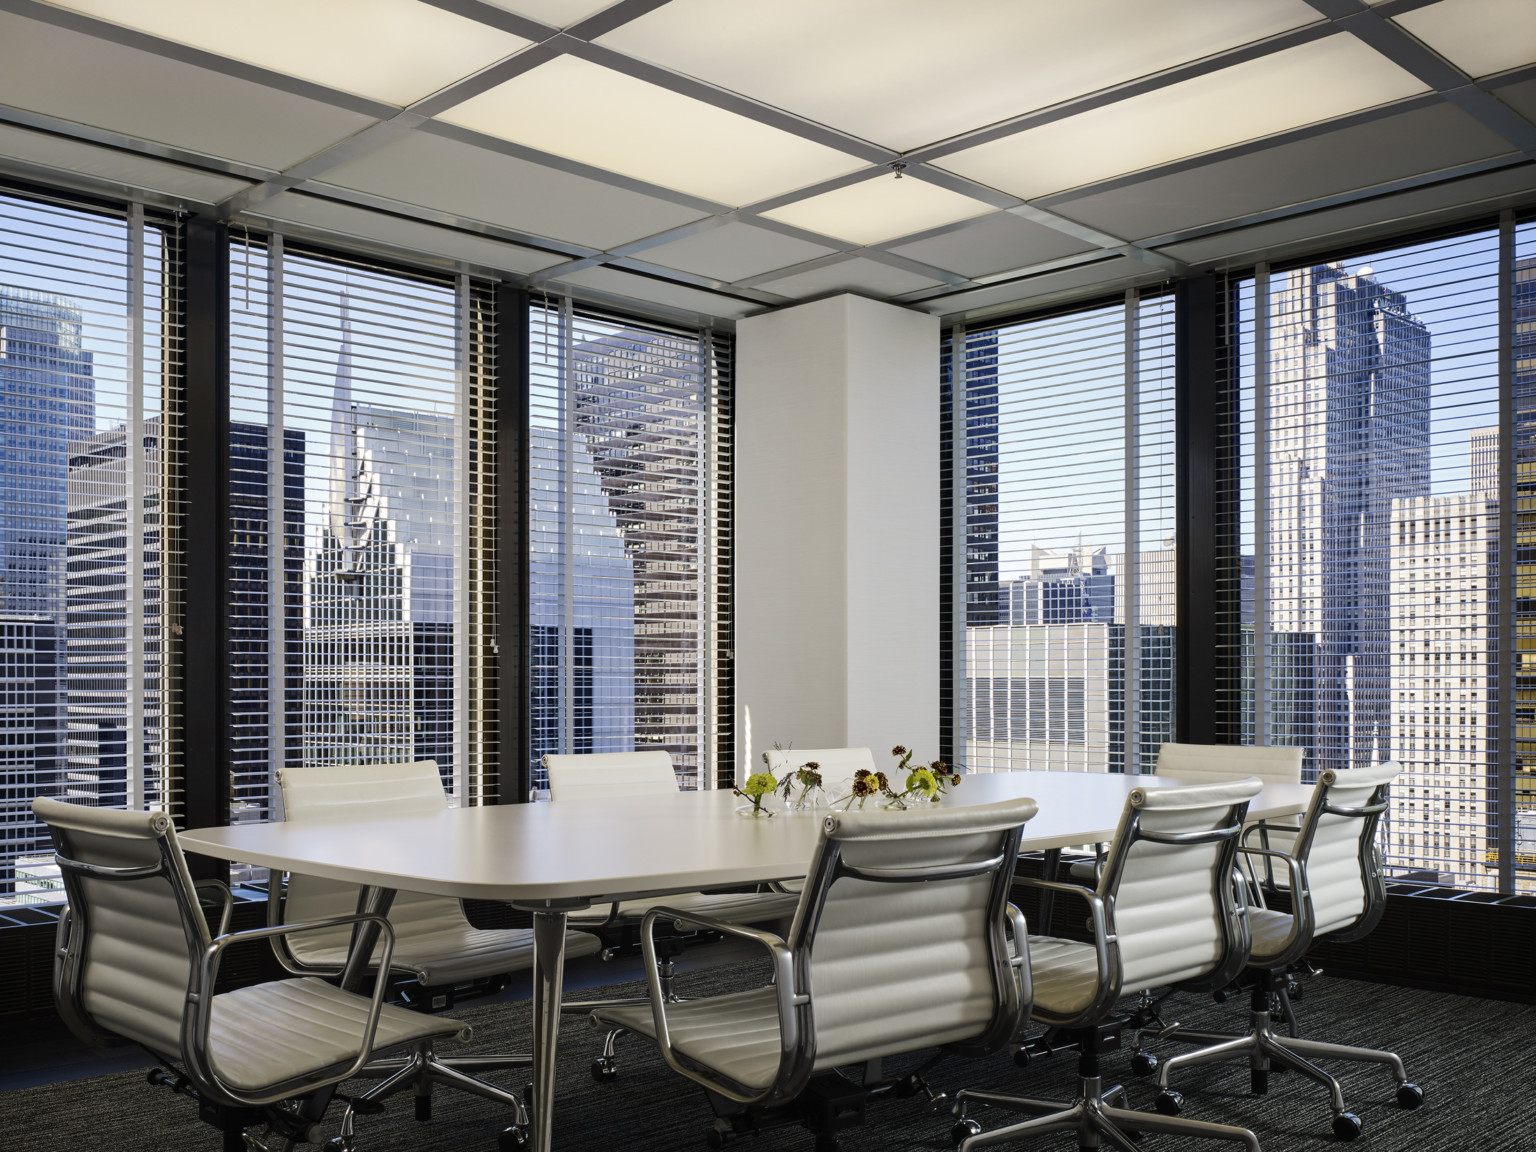 Corner conference room with floor to ceiling windows on both walls separated by white column. Long white table and chairs